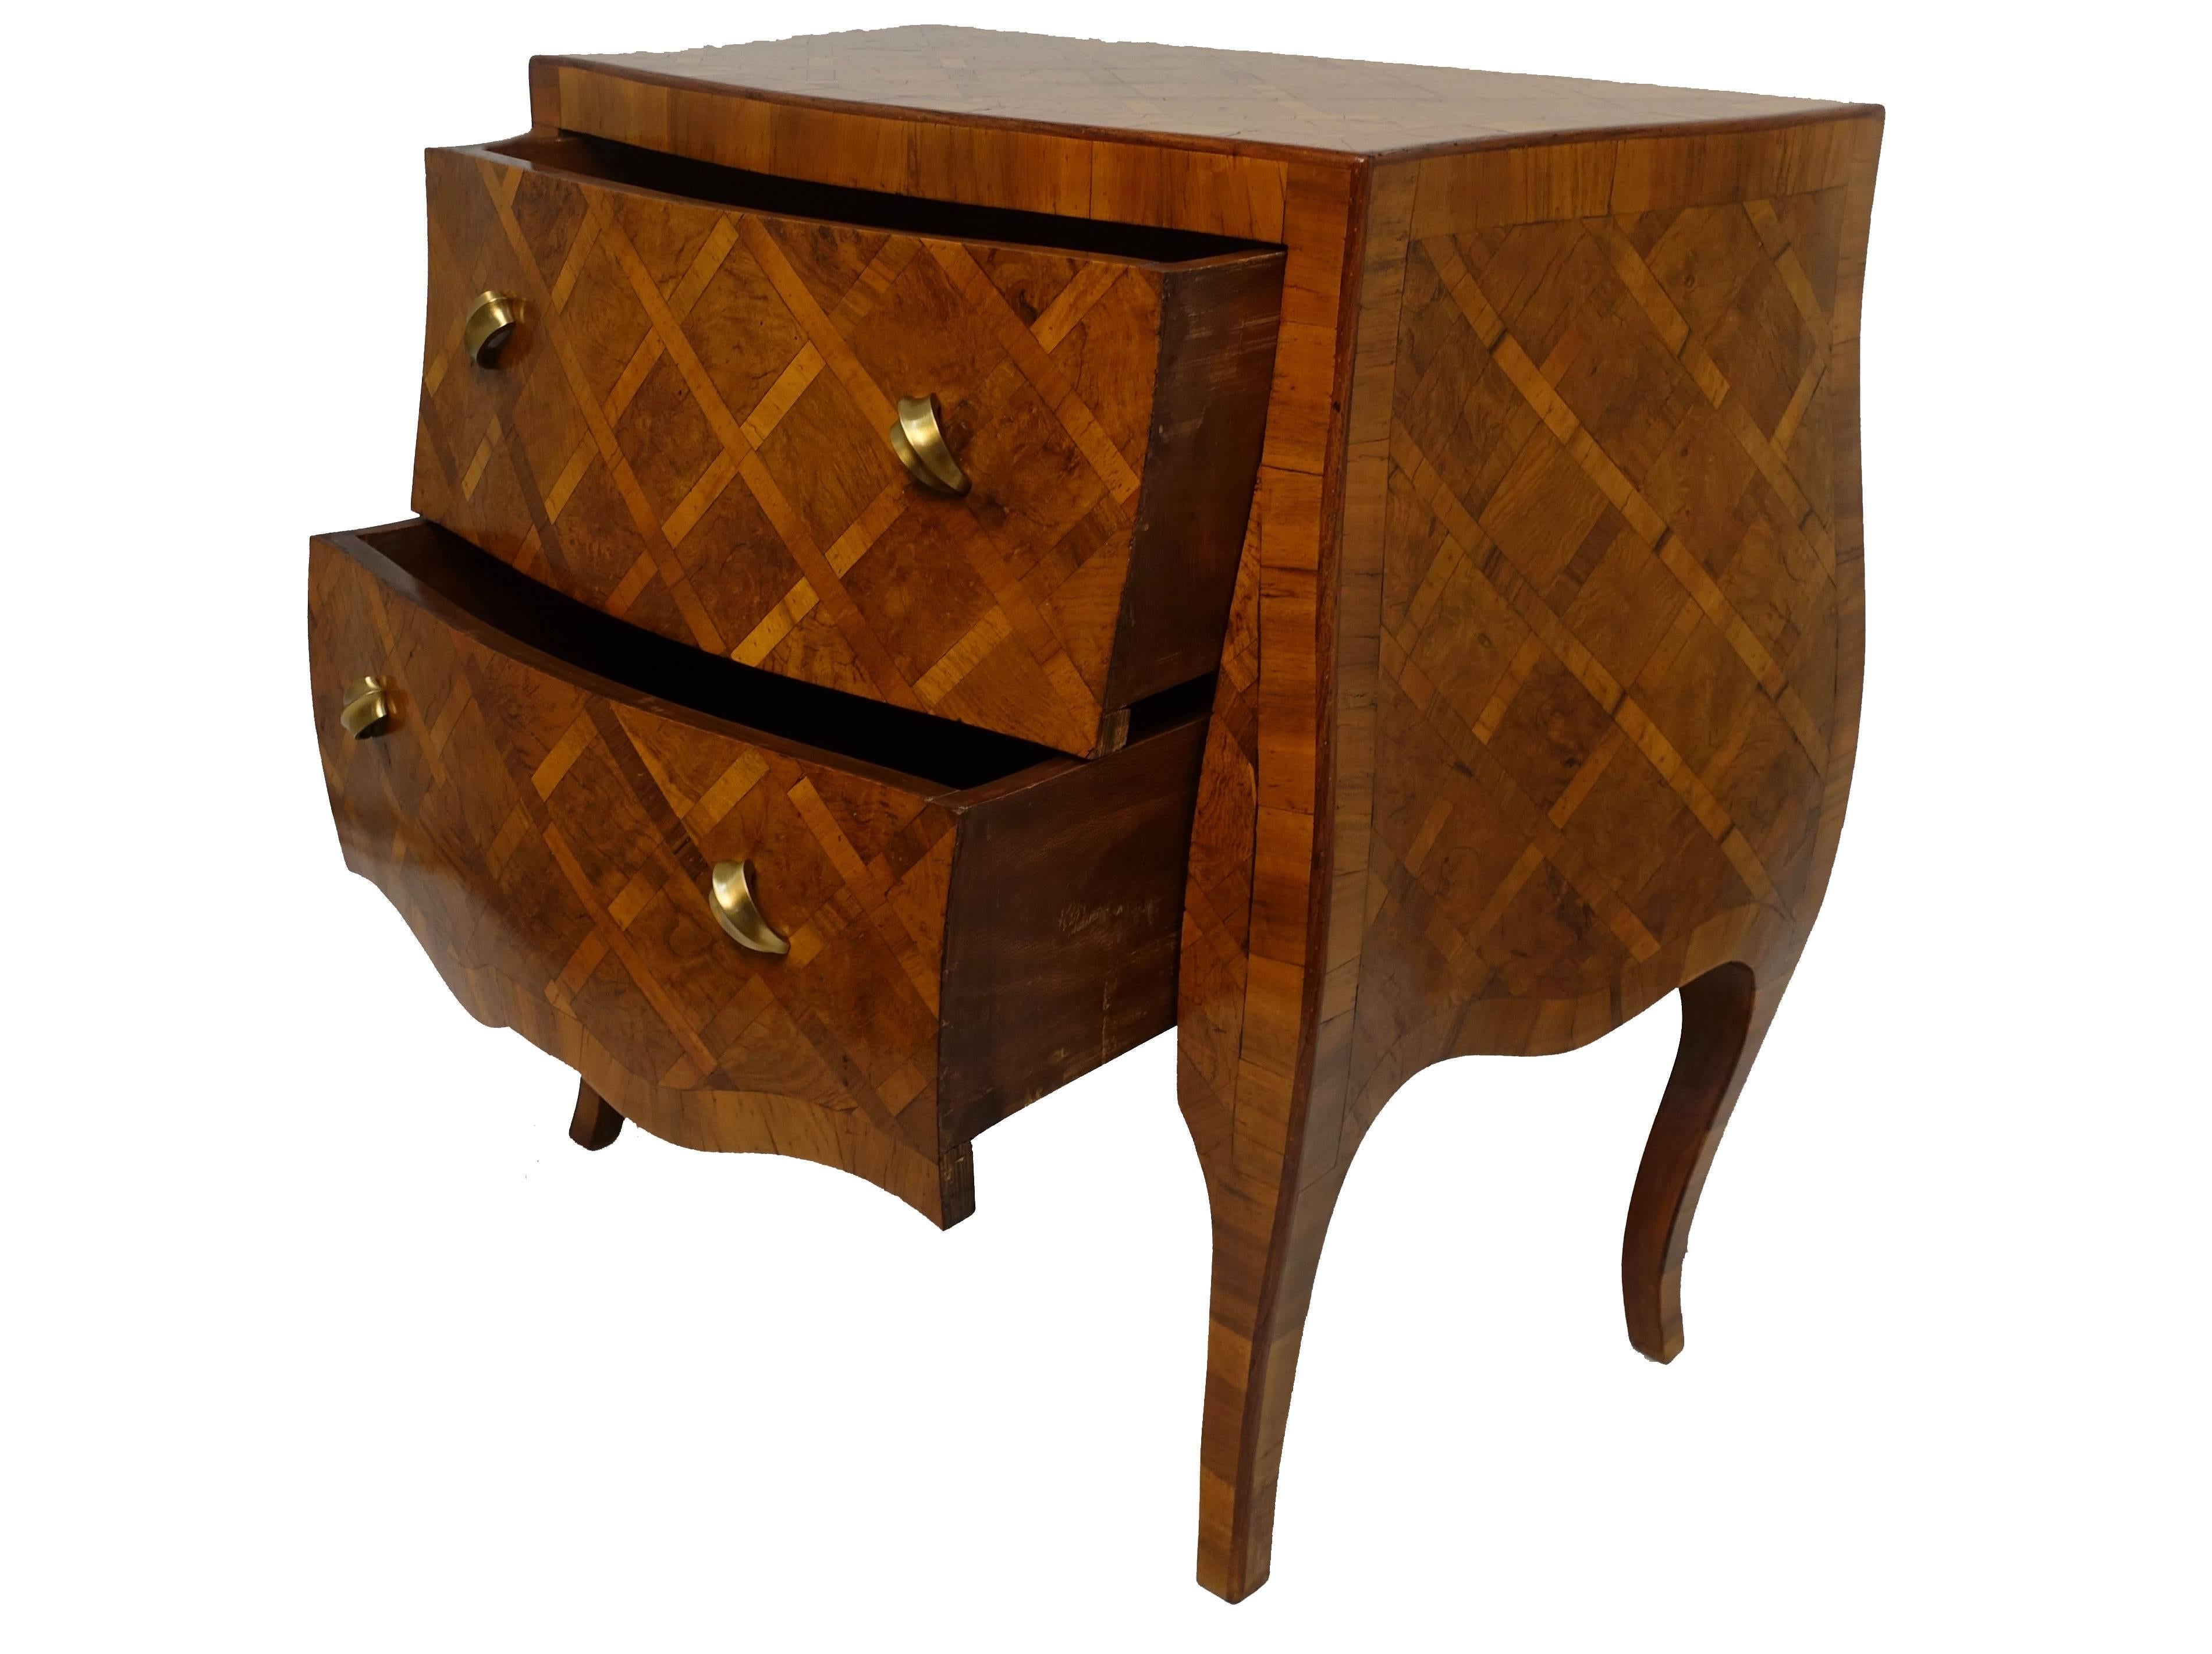 20th Century Italian Olivewood Bombe Commode with Parquetry Inlay